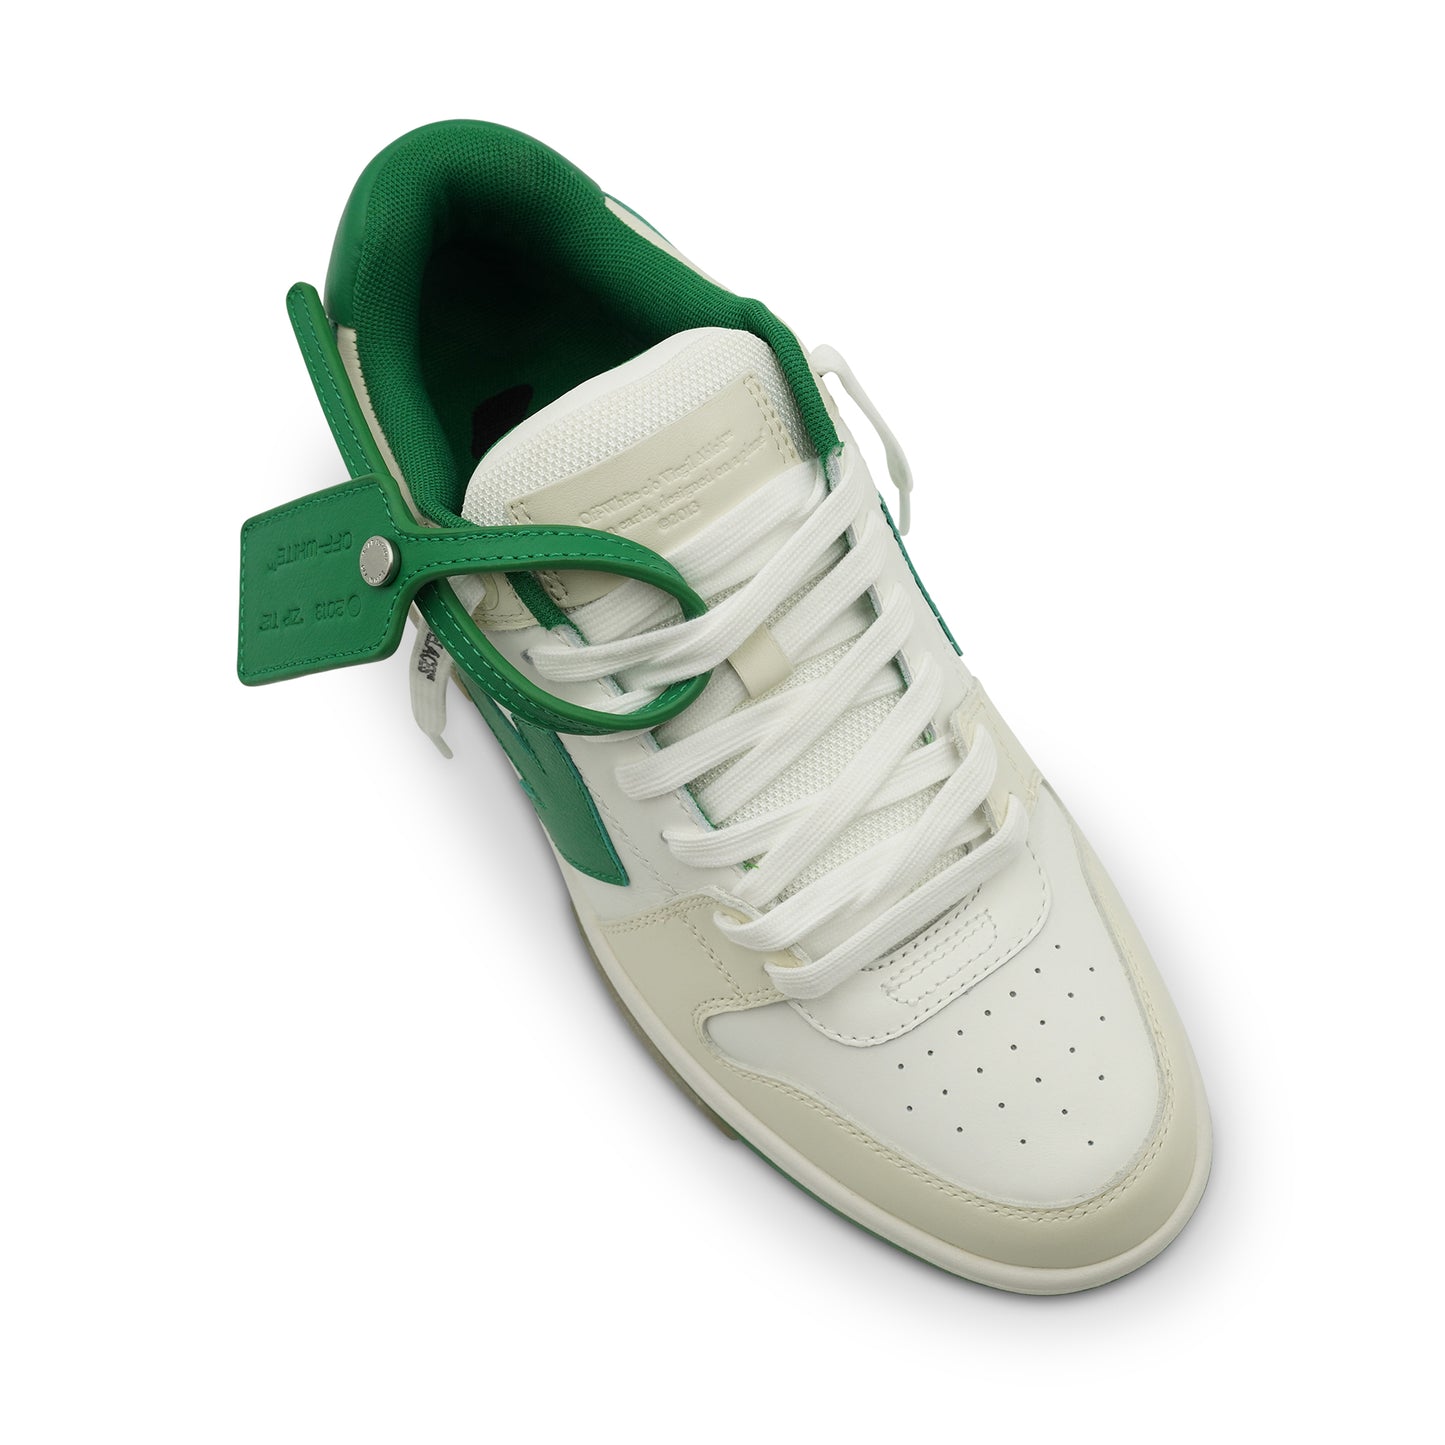 Out Of Office Calf Leather Sneaker in Pristine/Green